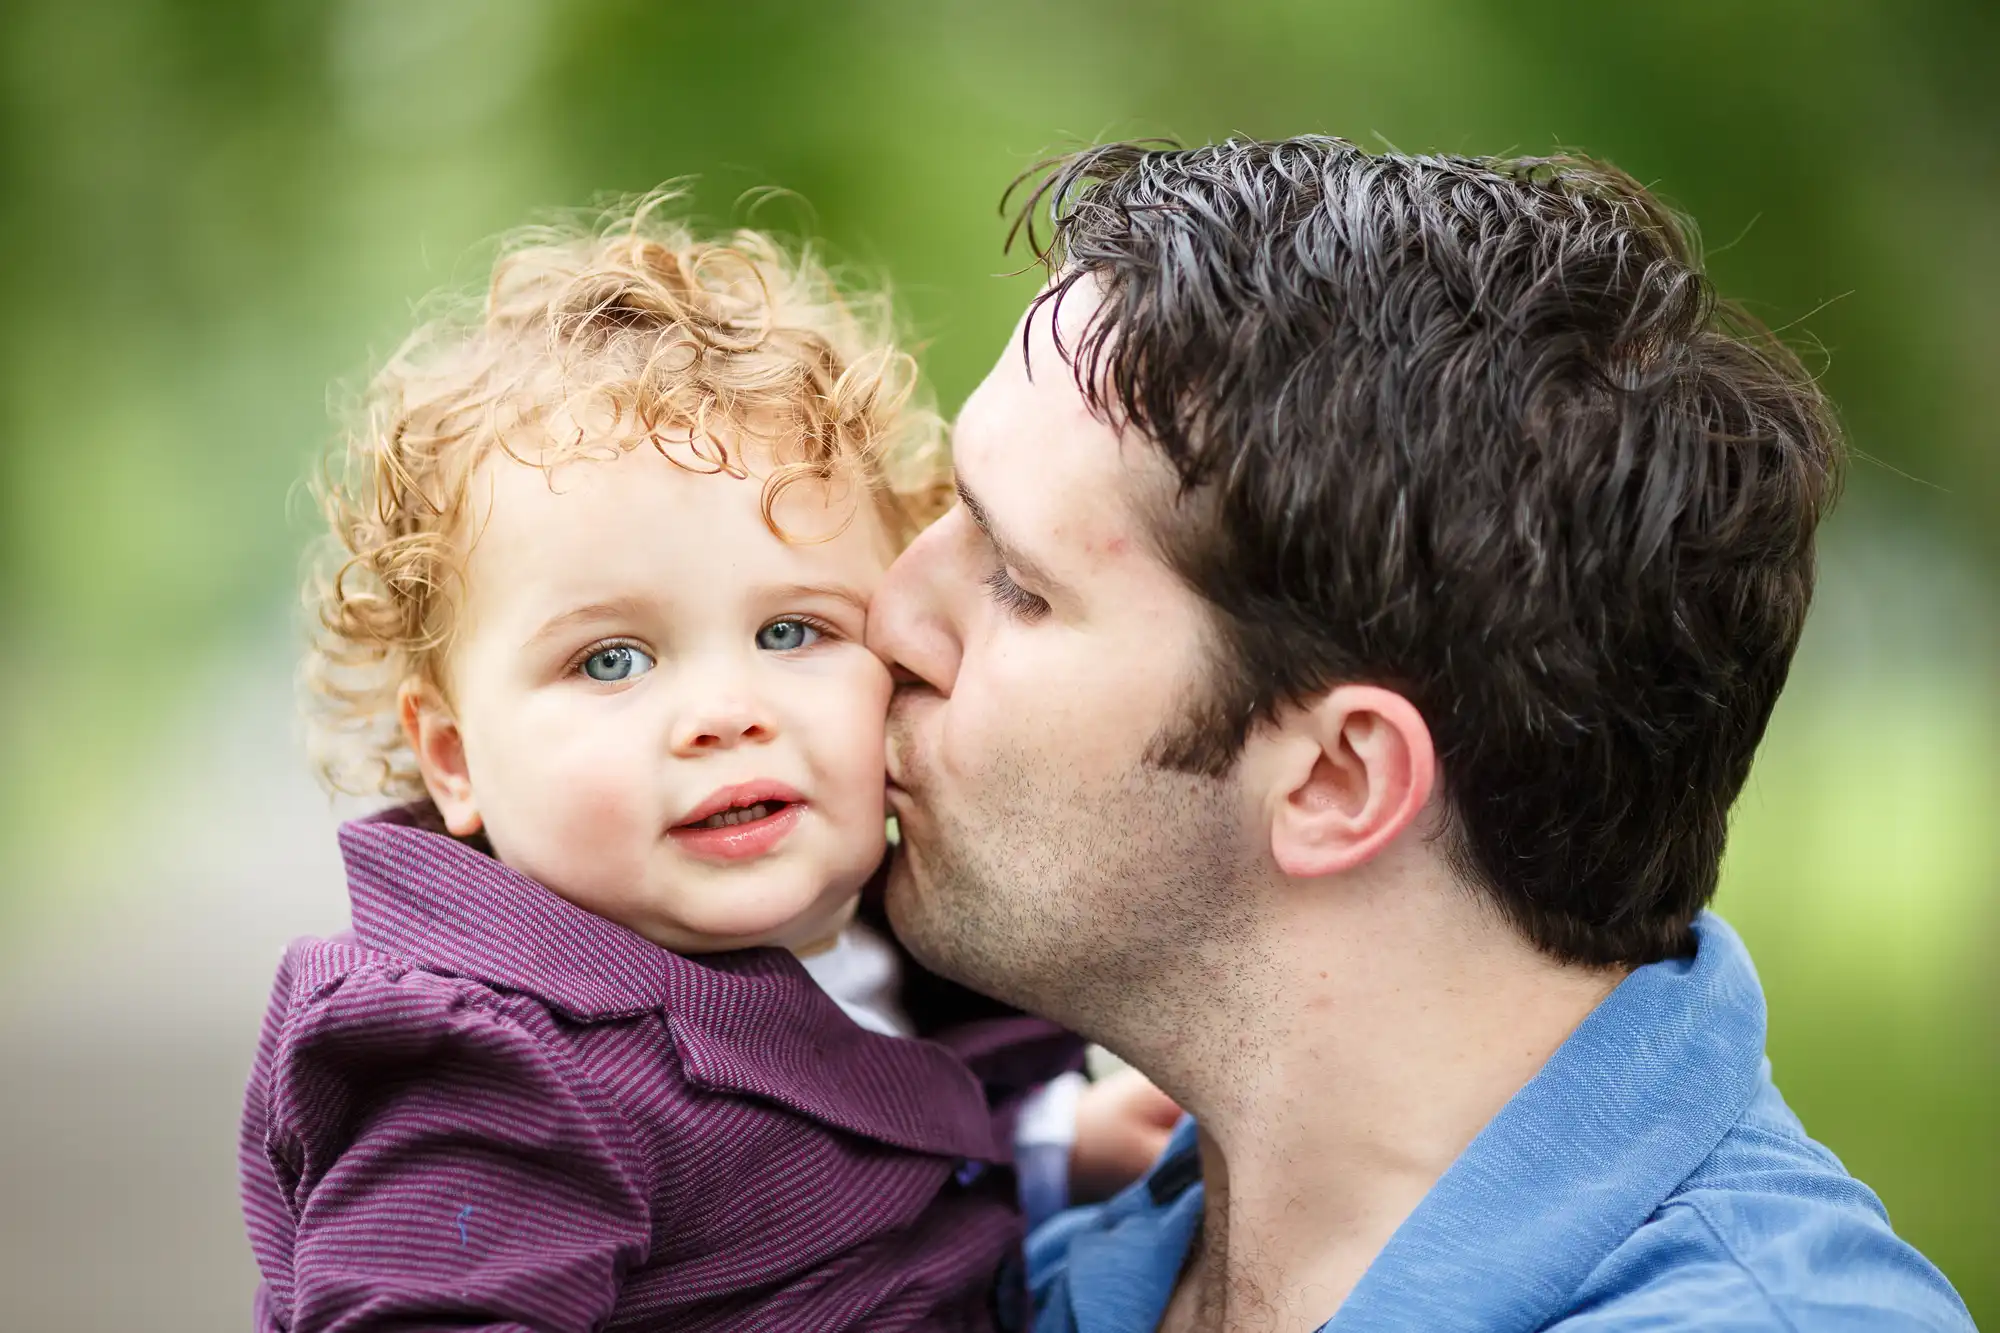 Father kissing his toddler with curly hair on the cheek, both smiling, outdoors with blurry green background.